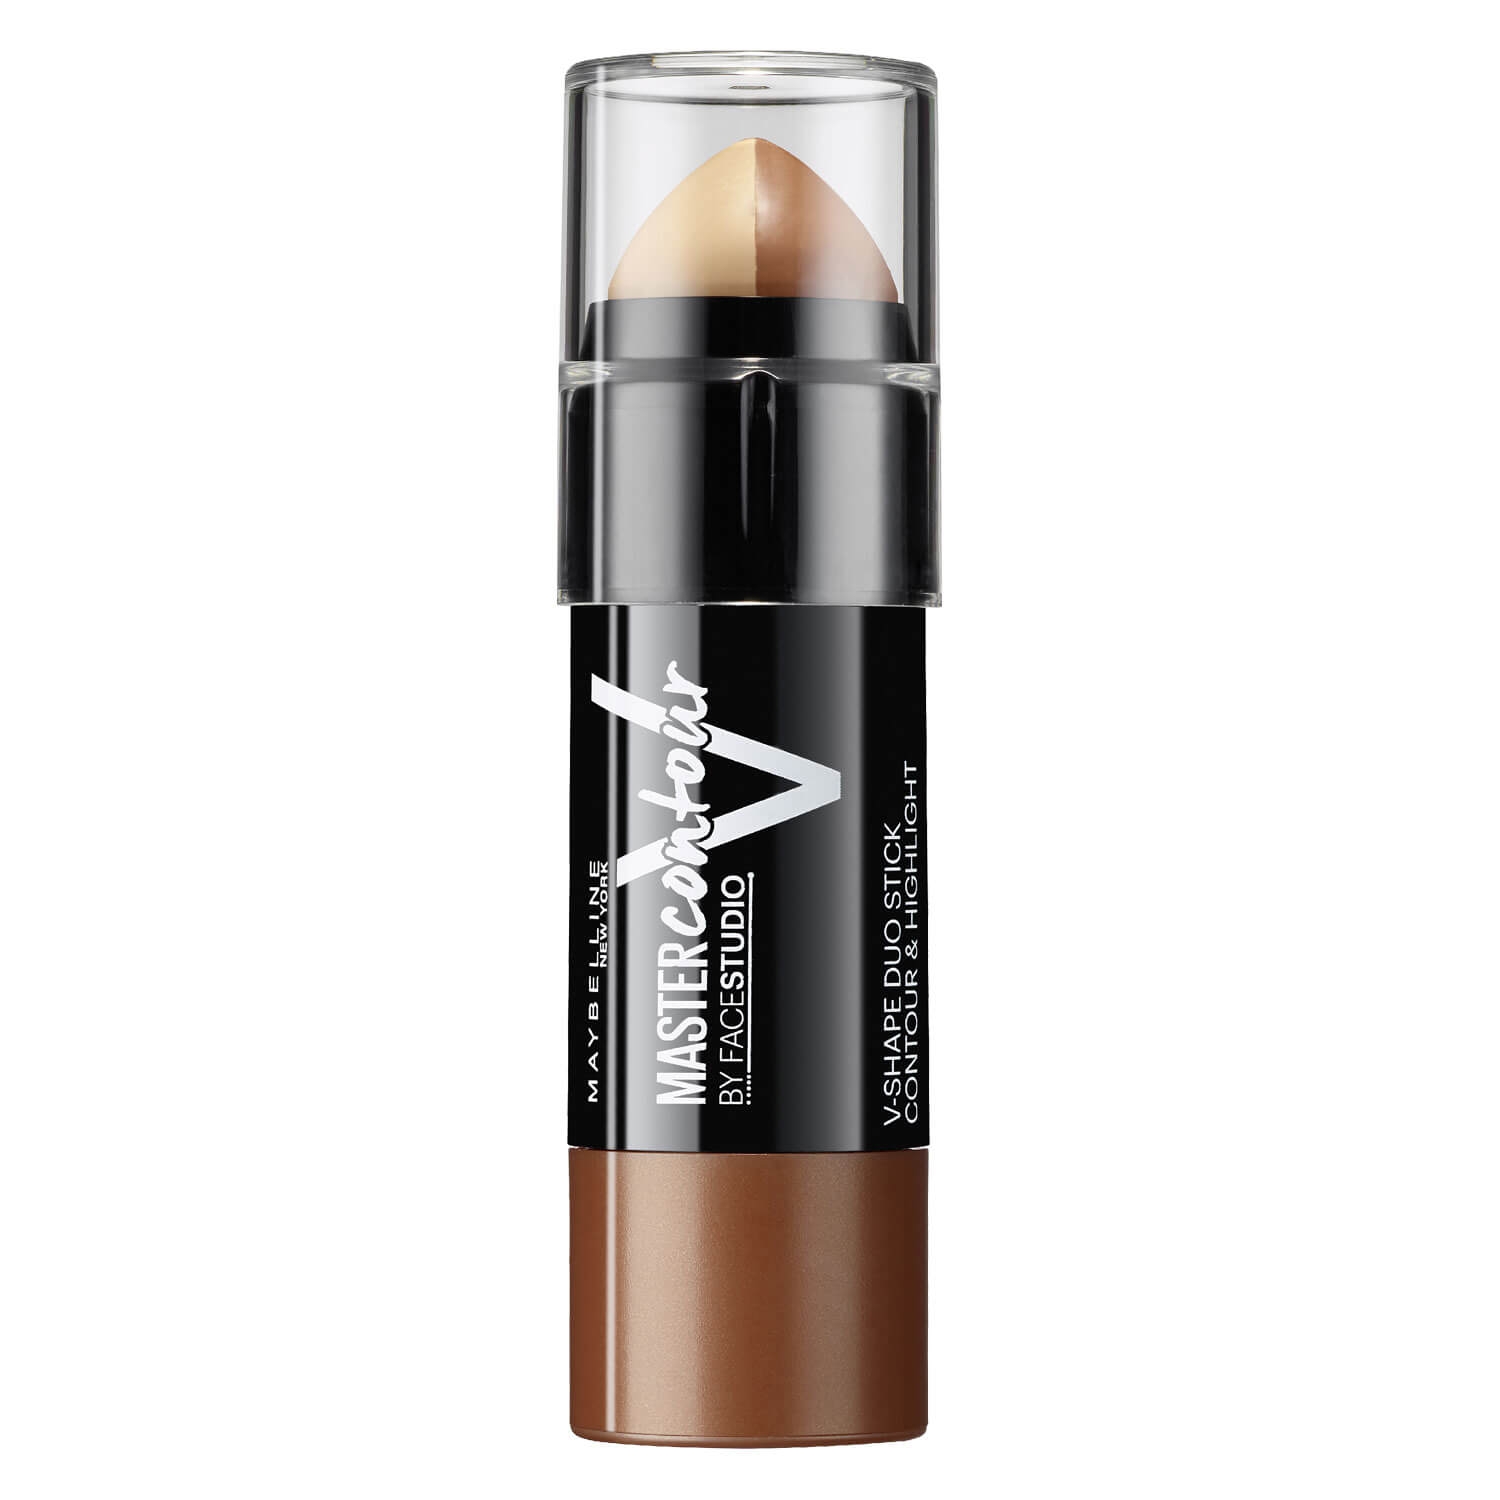 Product image from Maybelline NY Teint - Master Contour Kontur-Duo-Stick Medium